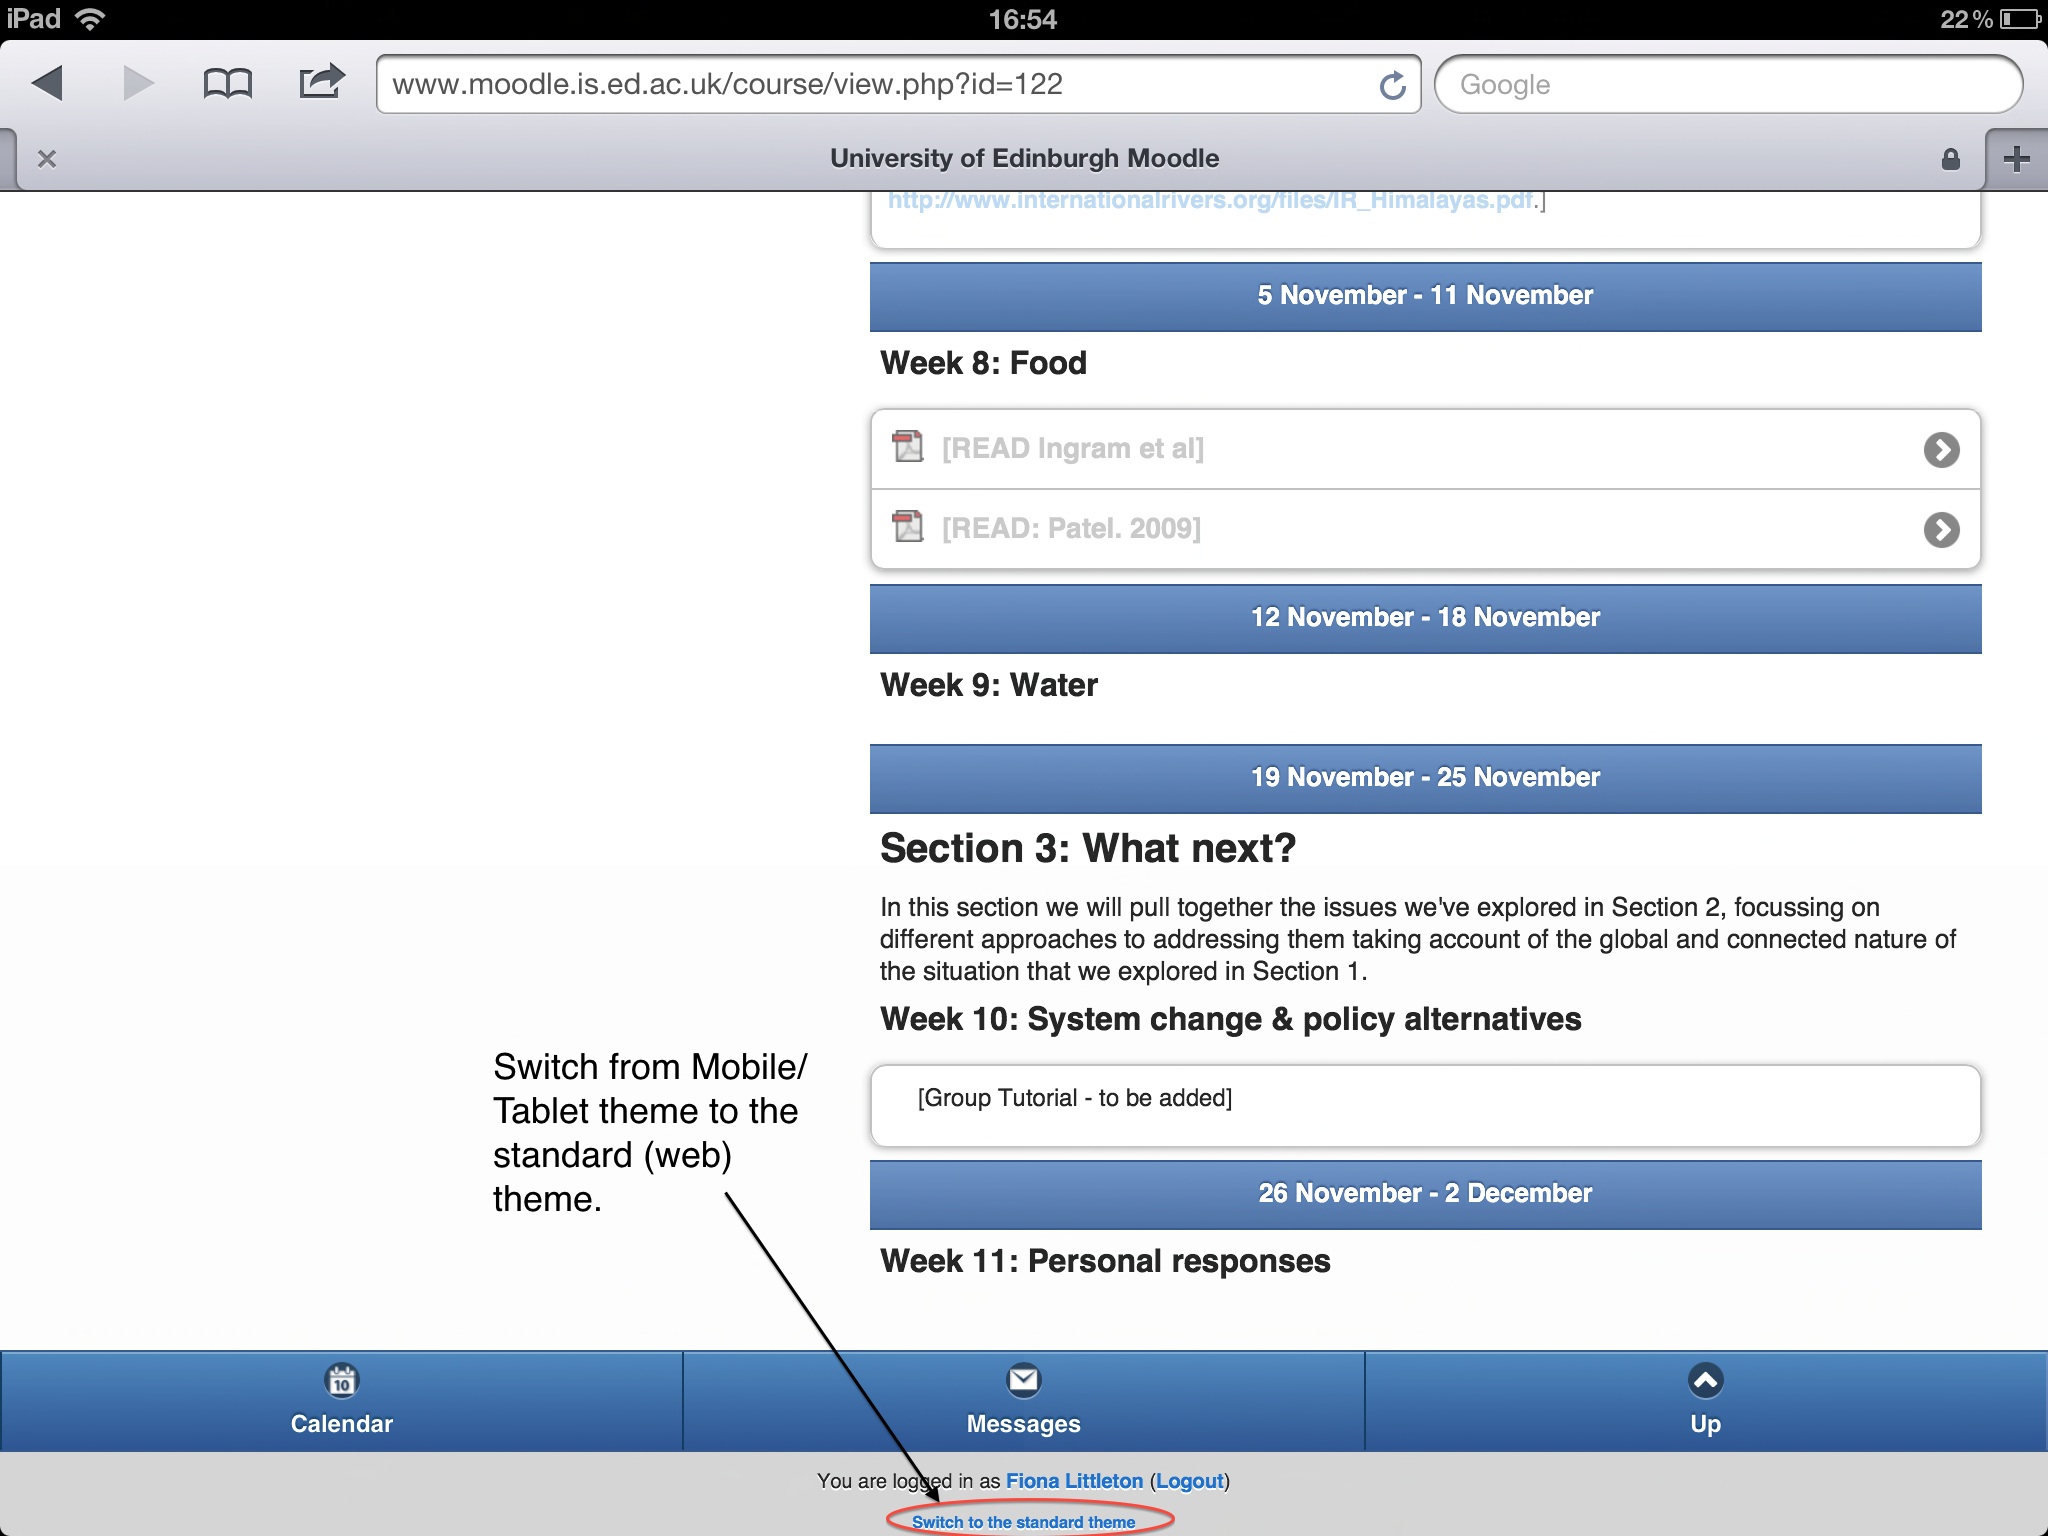 Attachment moodle_ipad_switchtheme.jpg